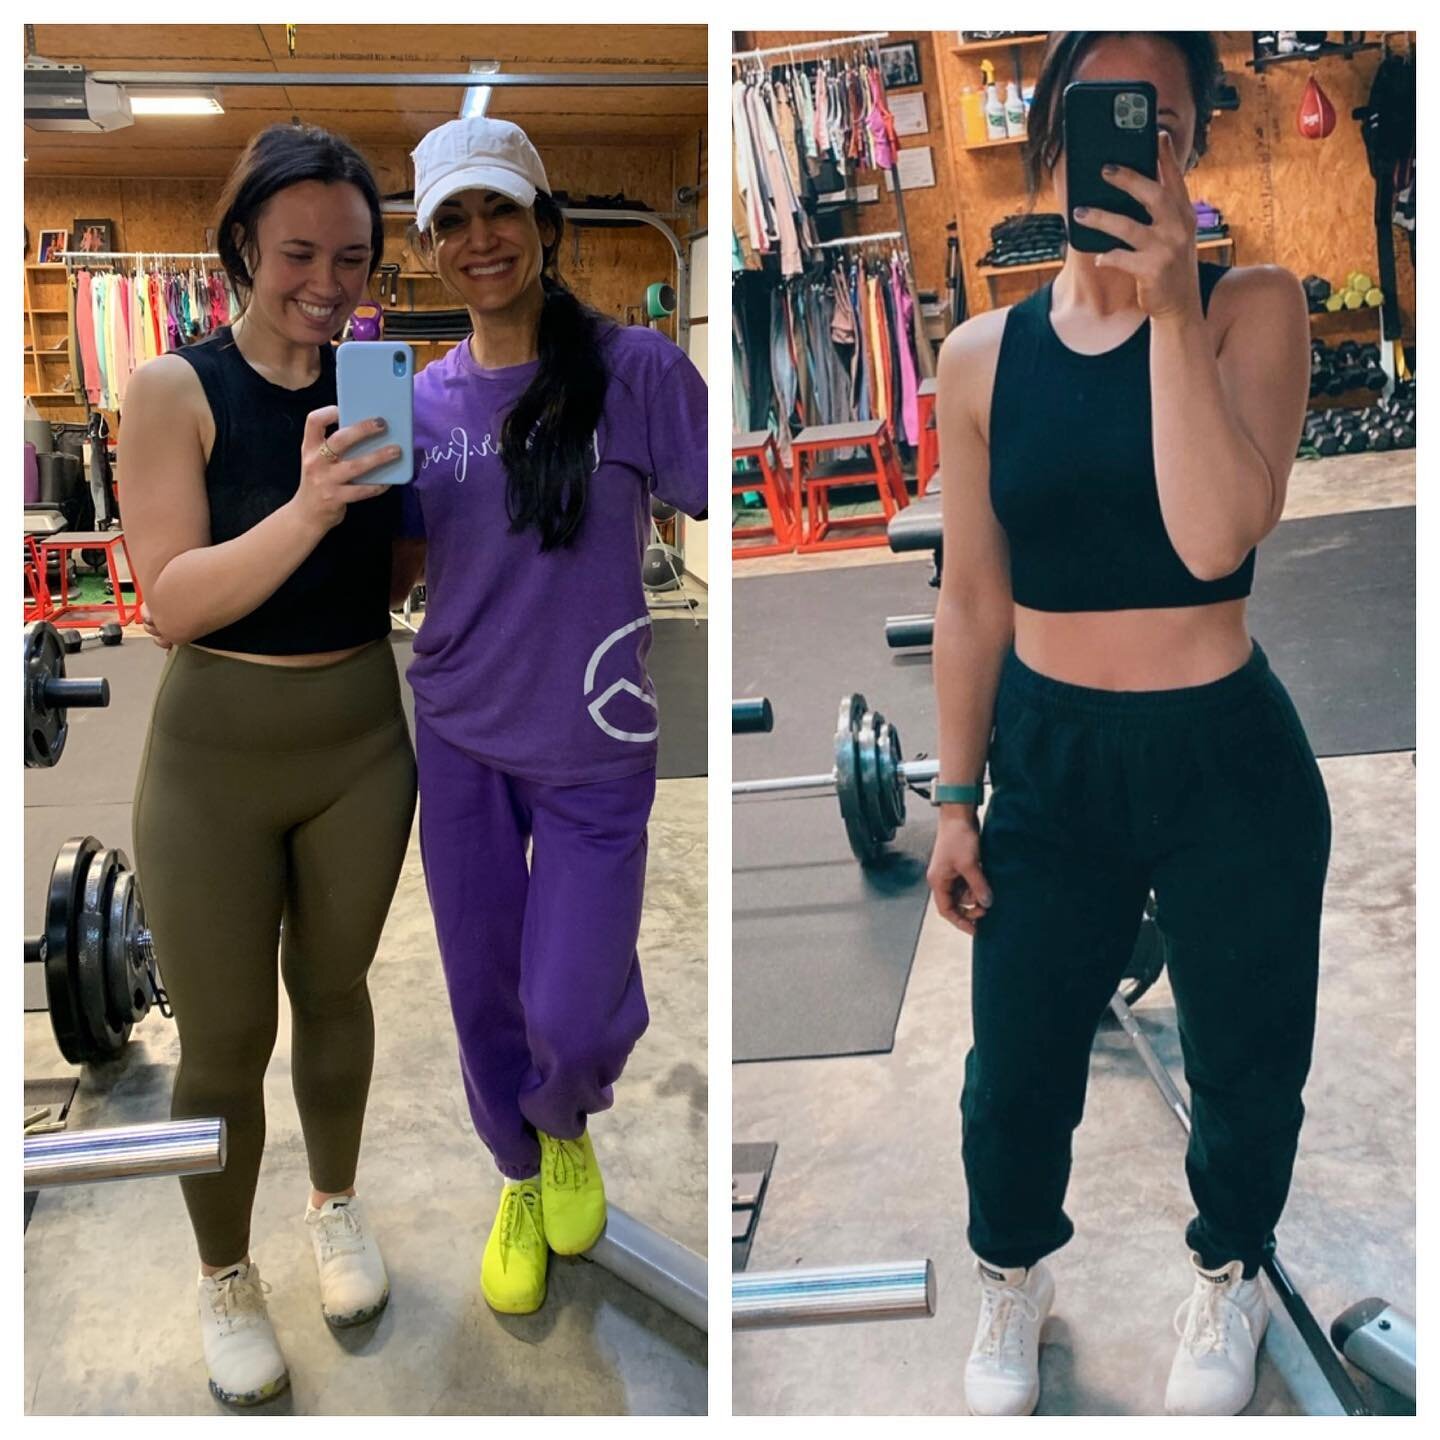 December &gt; February 

This my friends is what you call &quot;reverse dieting&quot; and &quot;body recomp&quot;

9 lbs difference for all the scale watchers and calories are up (we call that reverse dieting in the health and fitness world)

We have